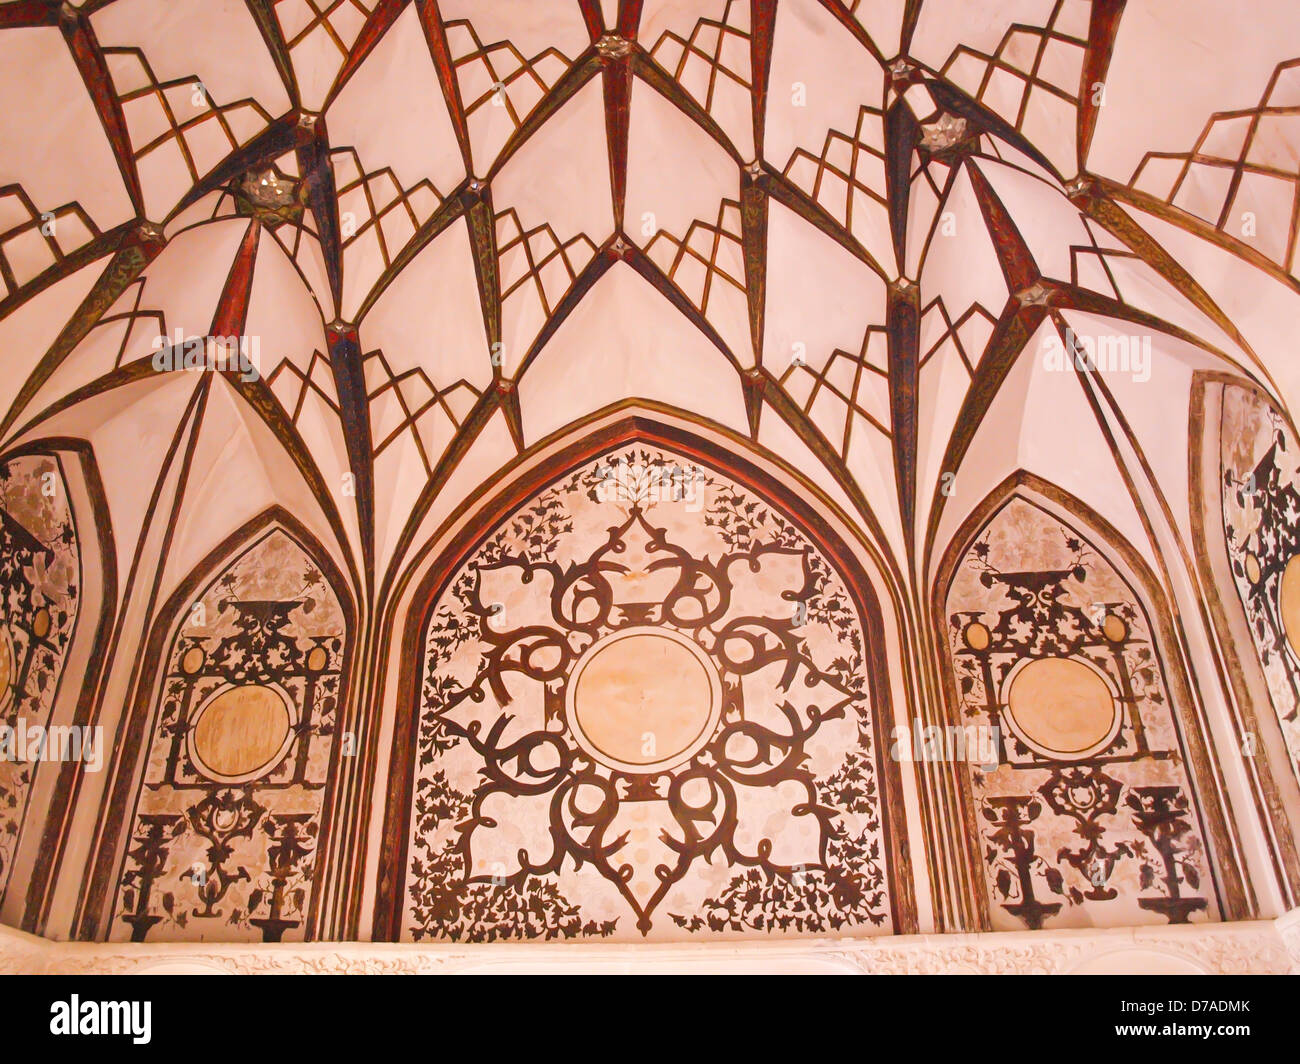 Ceiling decoration interior of historic old house in Kashan, Iran Stock Photo